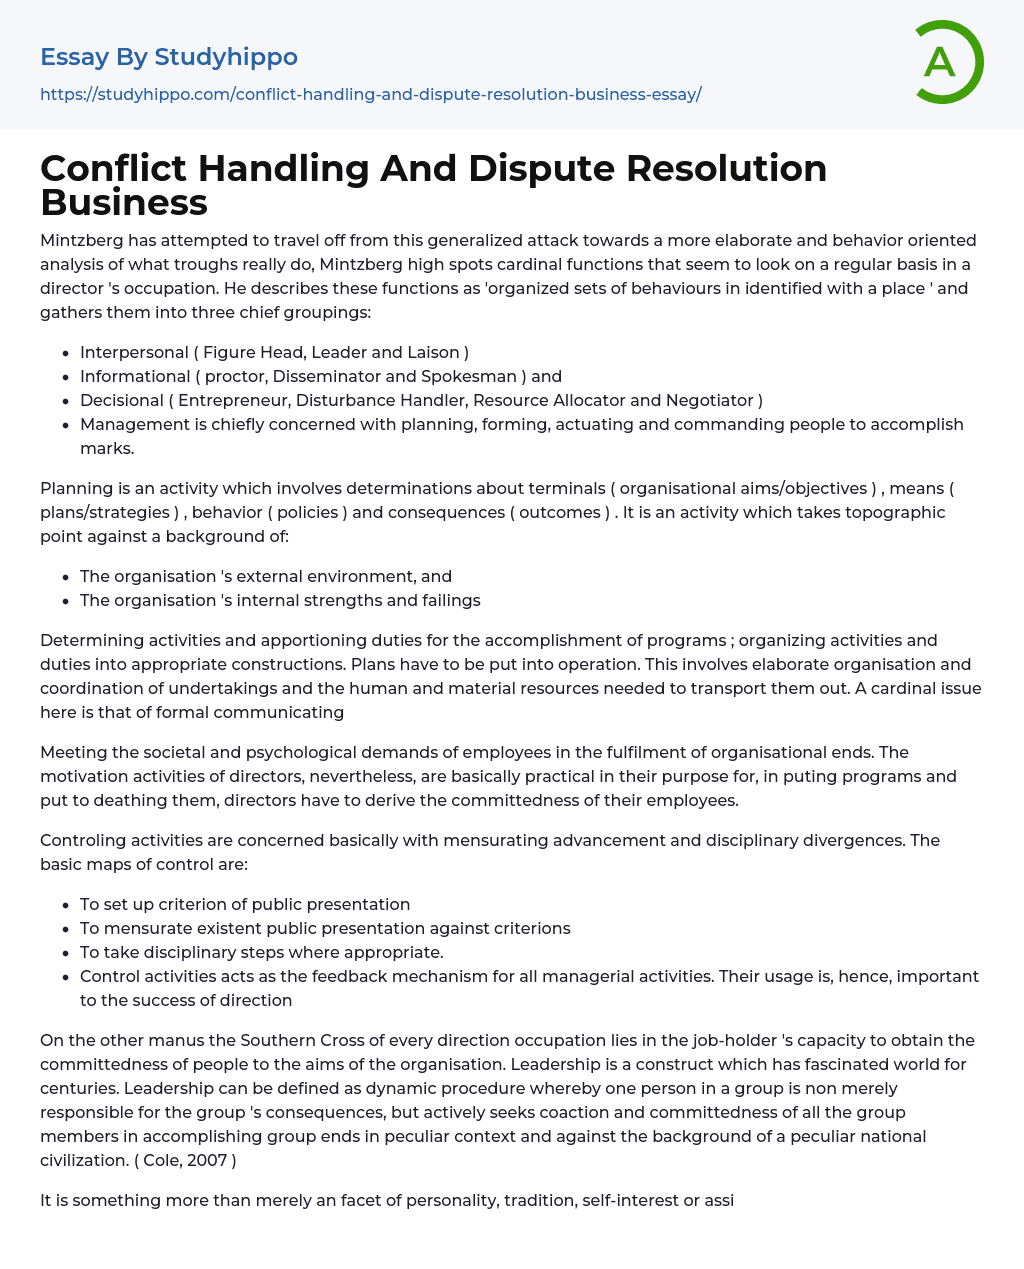 Conflict Handling And Dispute Resolution Business Essay Example